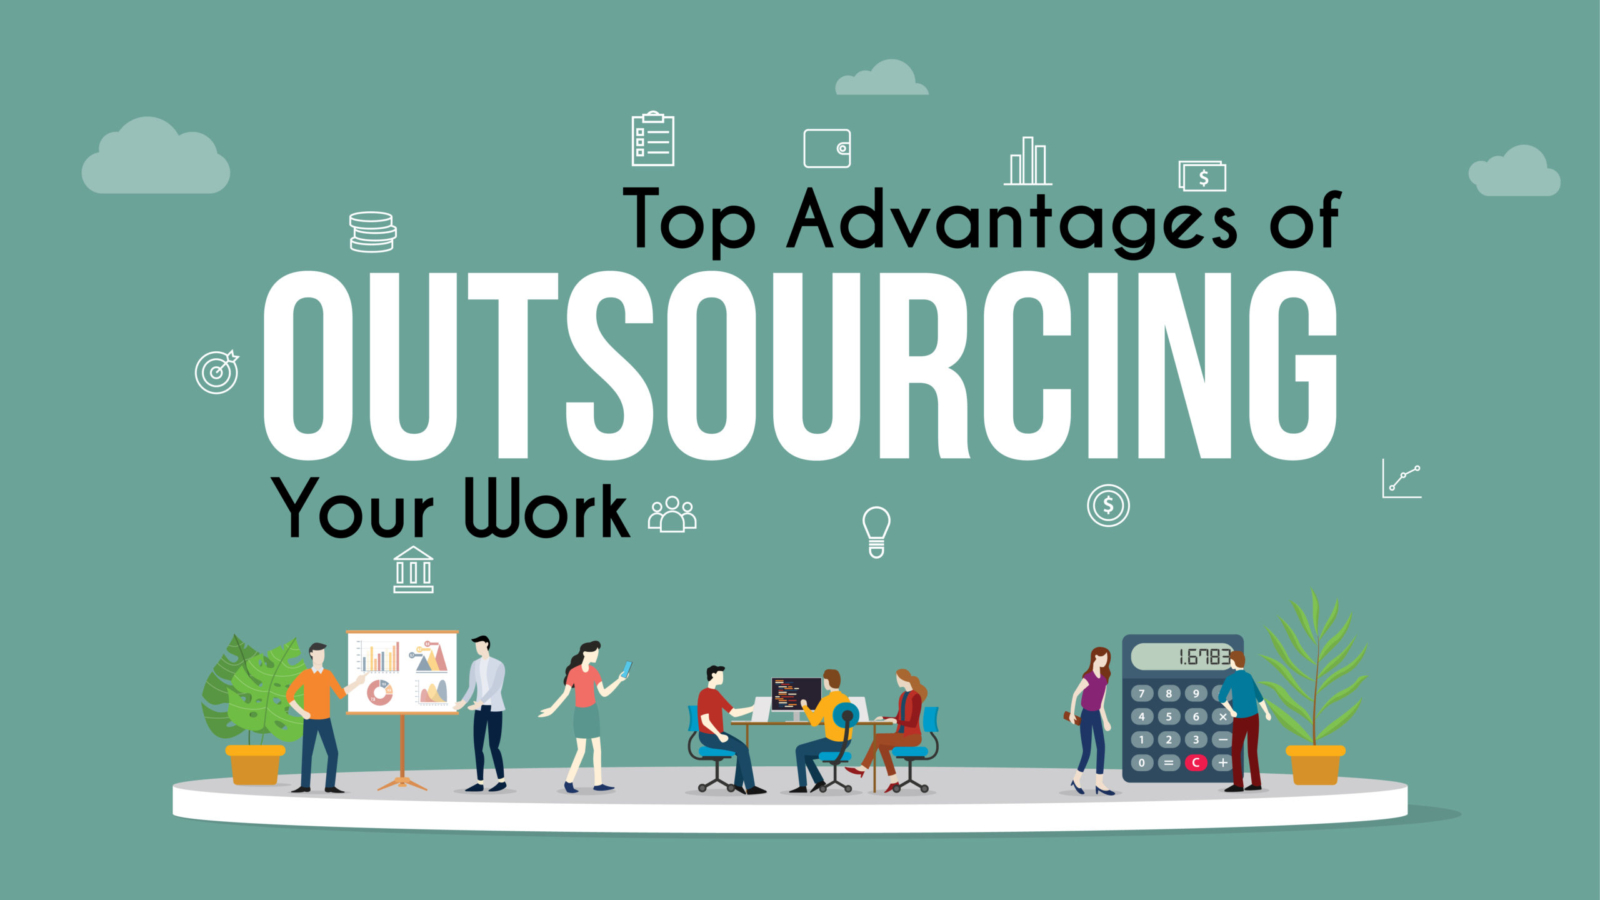 Top Advantages of Outsourcing Your Work